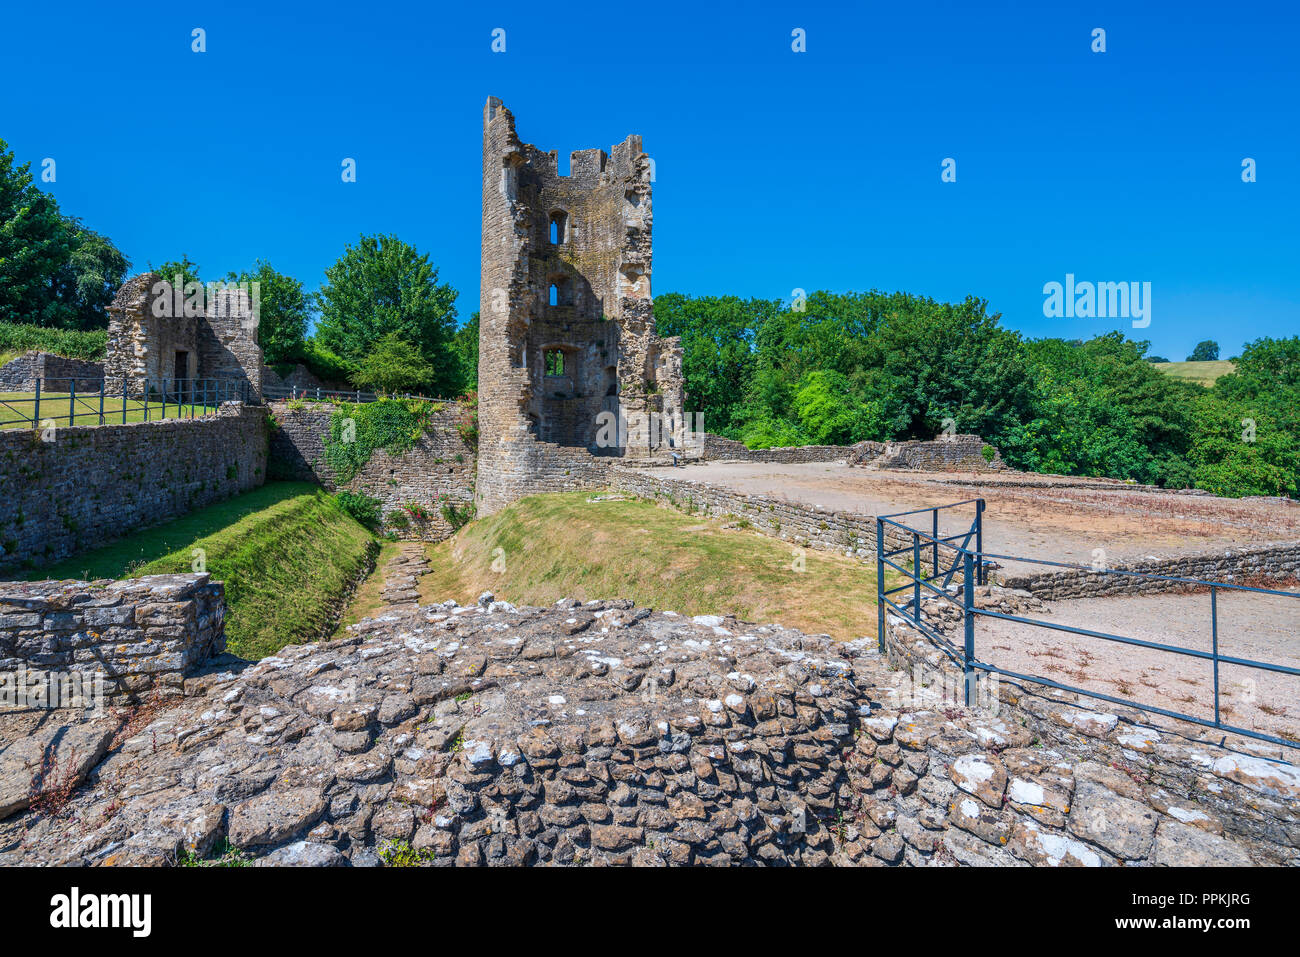 Farleigh Hungerford Castle, Somerset, Angleterre, Royaume-Uni, Europe Banque D'Images